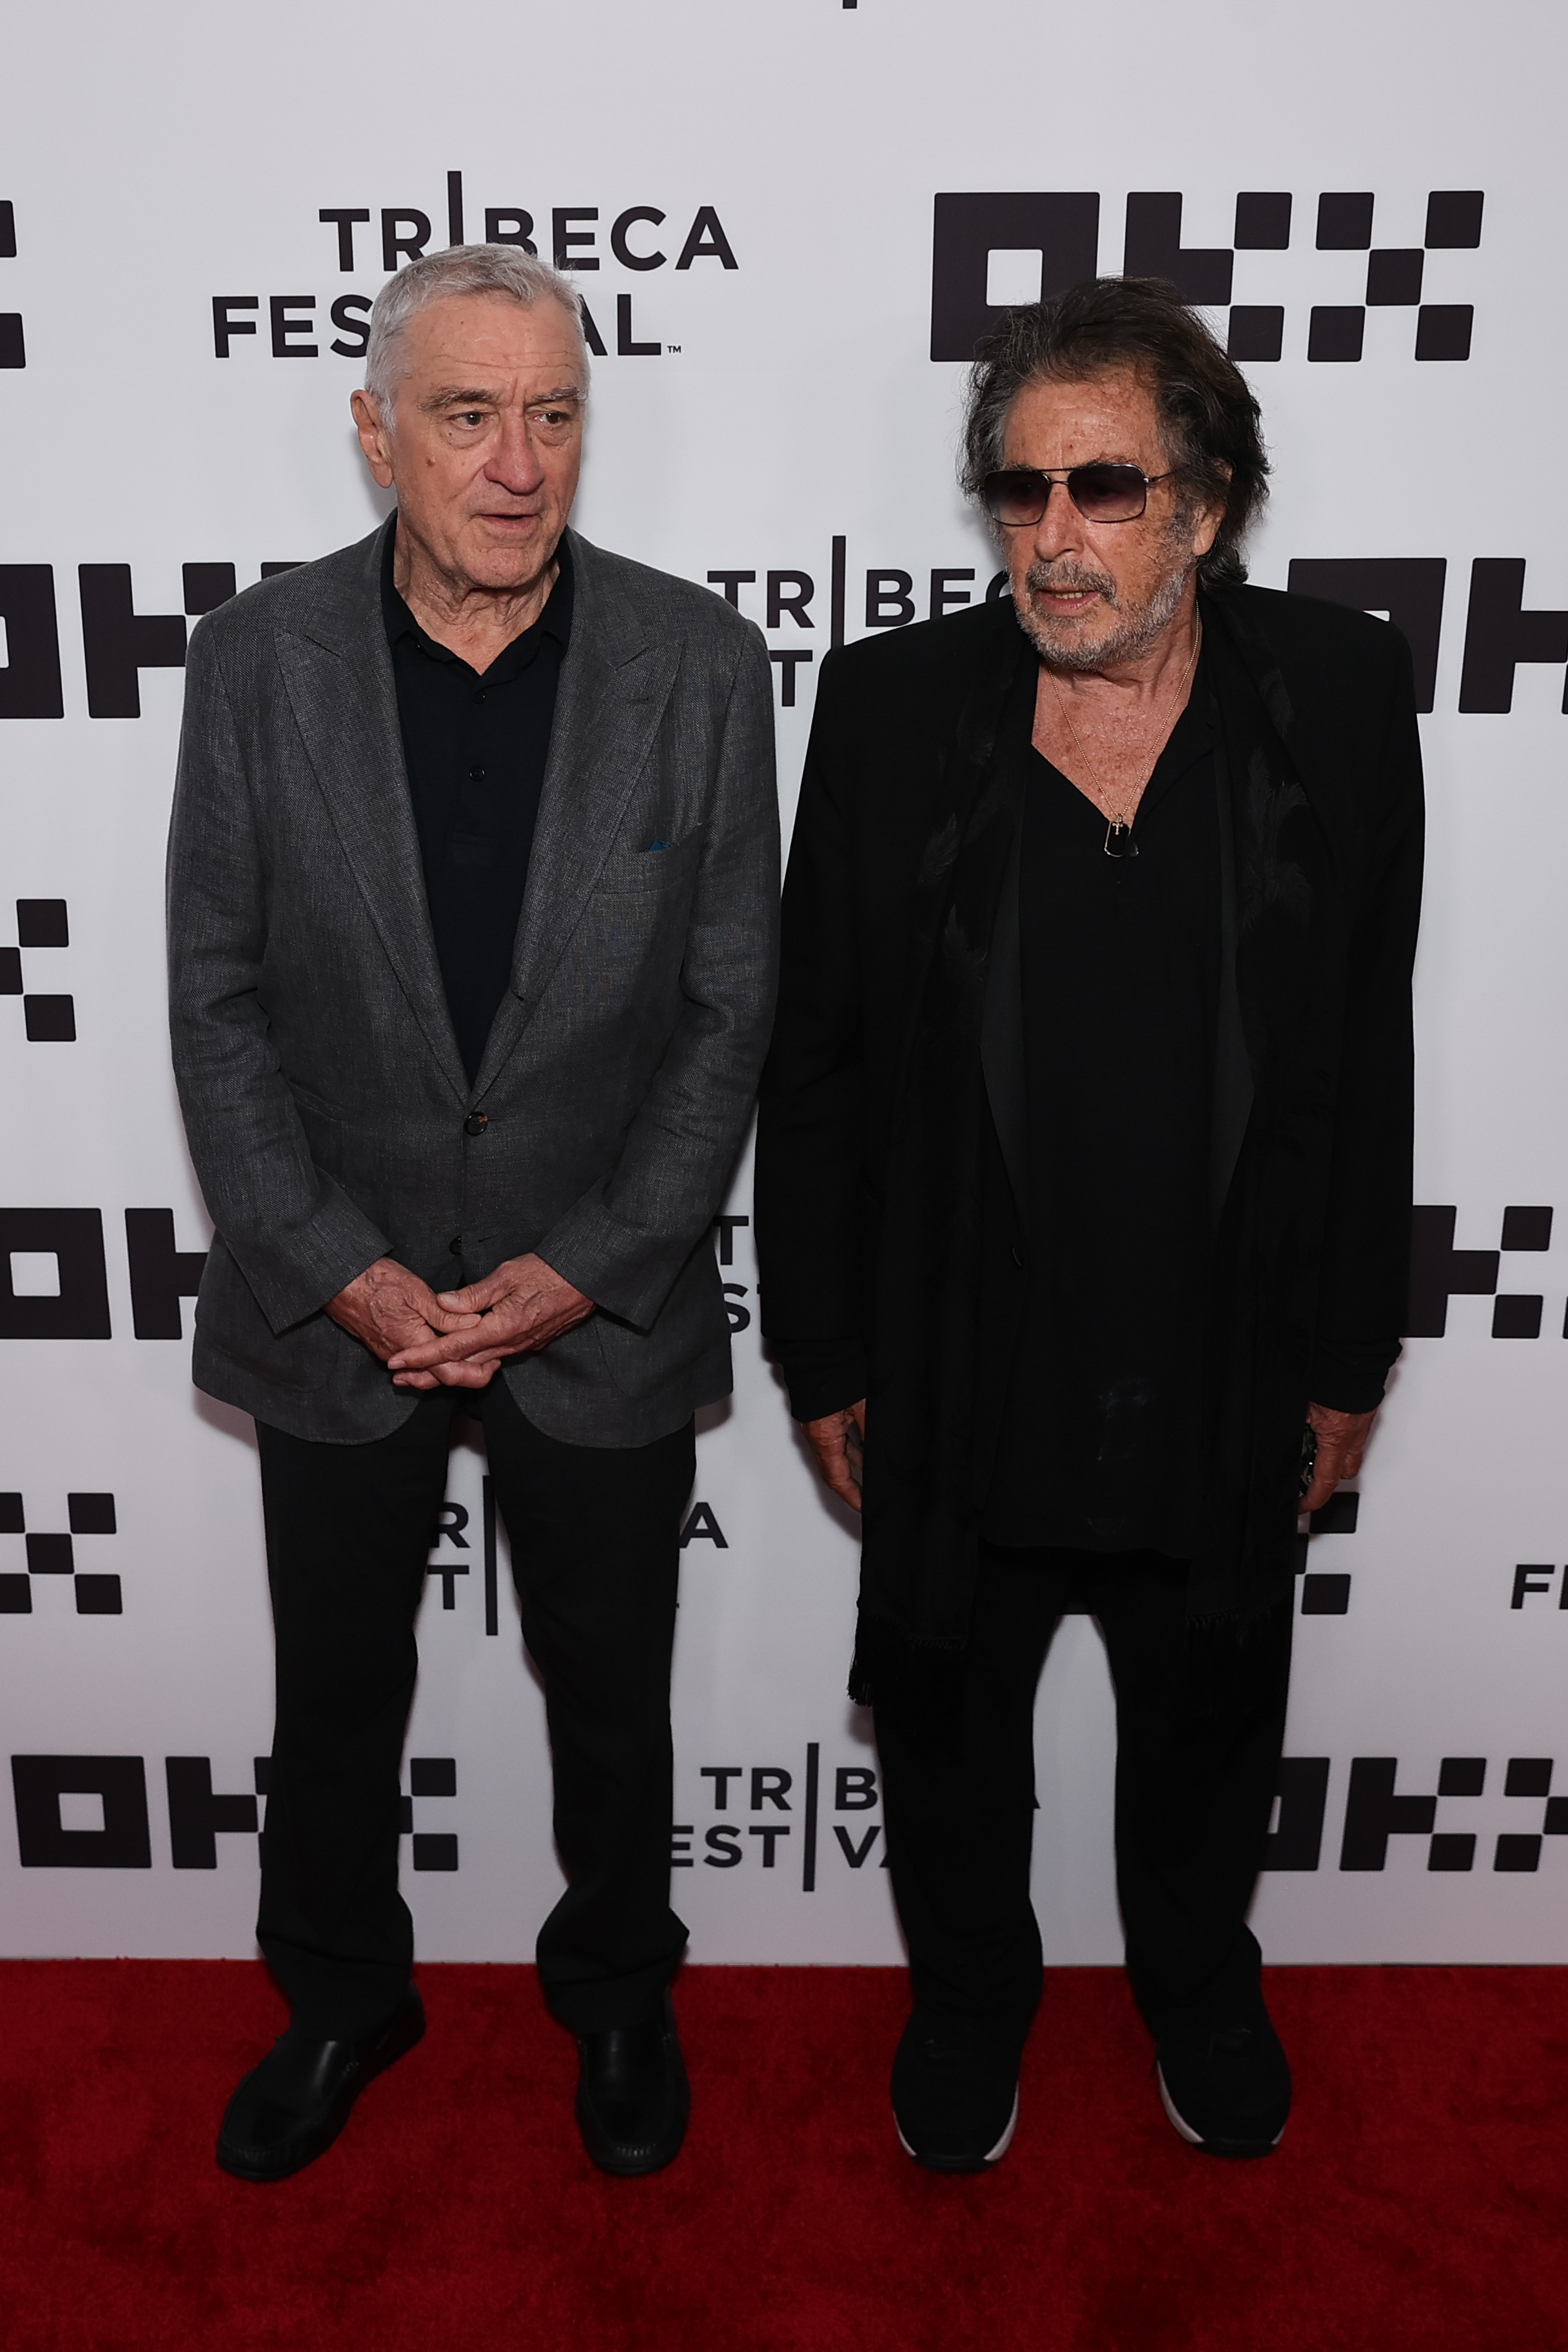 Robert De Niro on the red carpet of "Heat" at the 2022 Tribeca Festival in New York City, United States on June 17, 2022 | Source: Getty Images